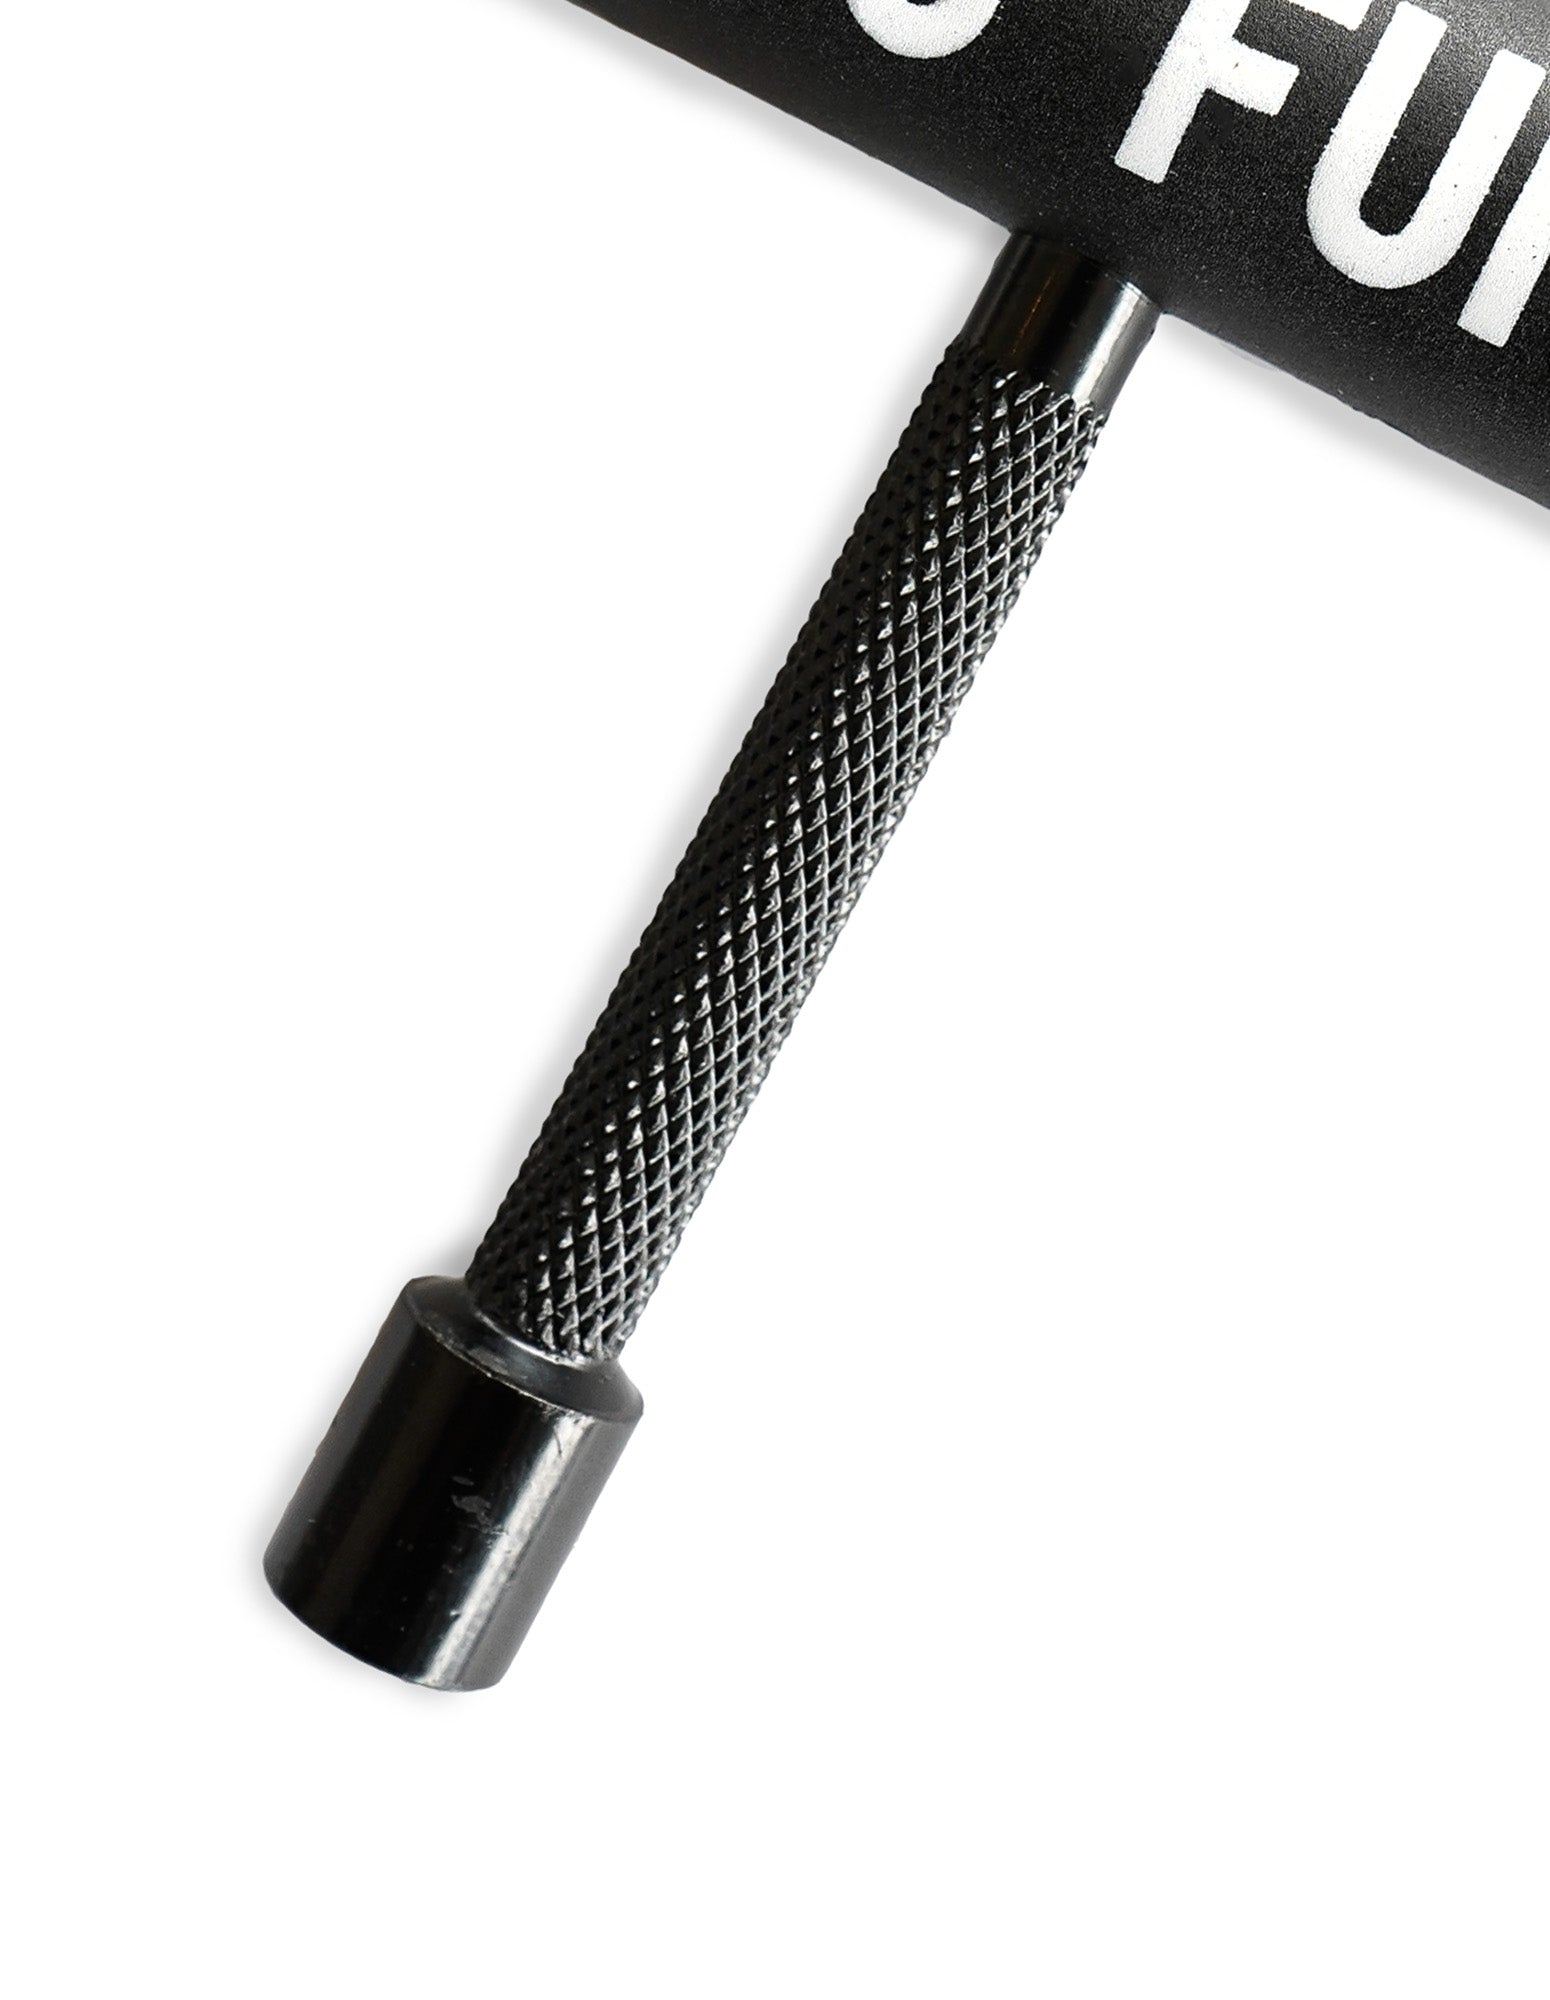 The "No Fun®" skate tool.  The main body of the tool is black, with a large "No Fun®" logo in white.  The tool is in a "T" shape, and includes 3 socket sizes, a file, as well as a removable screwdriver and Allen key. This photo shows a closeup of one of the socket heads, and the built in file.